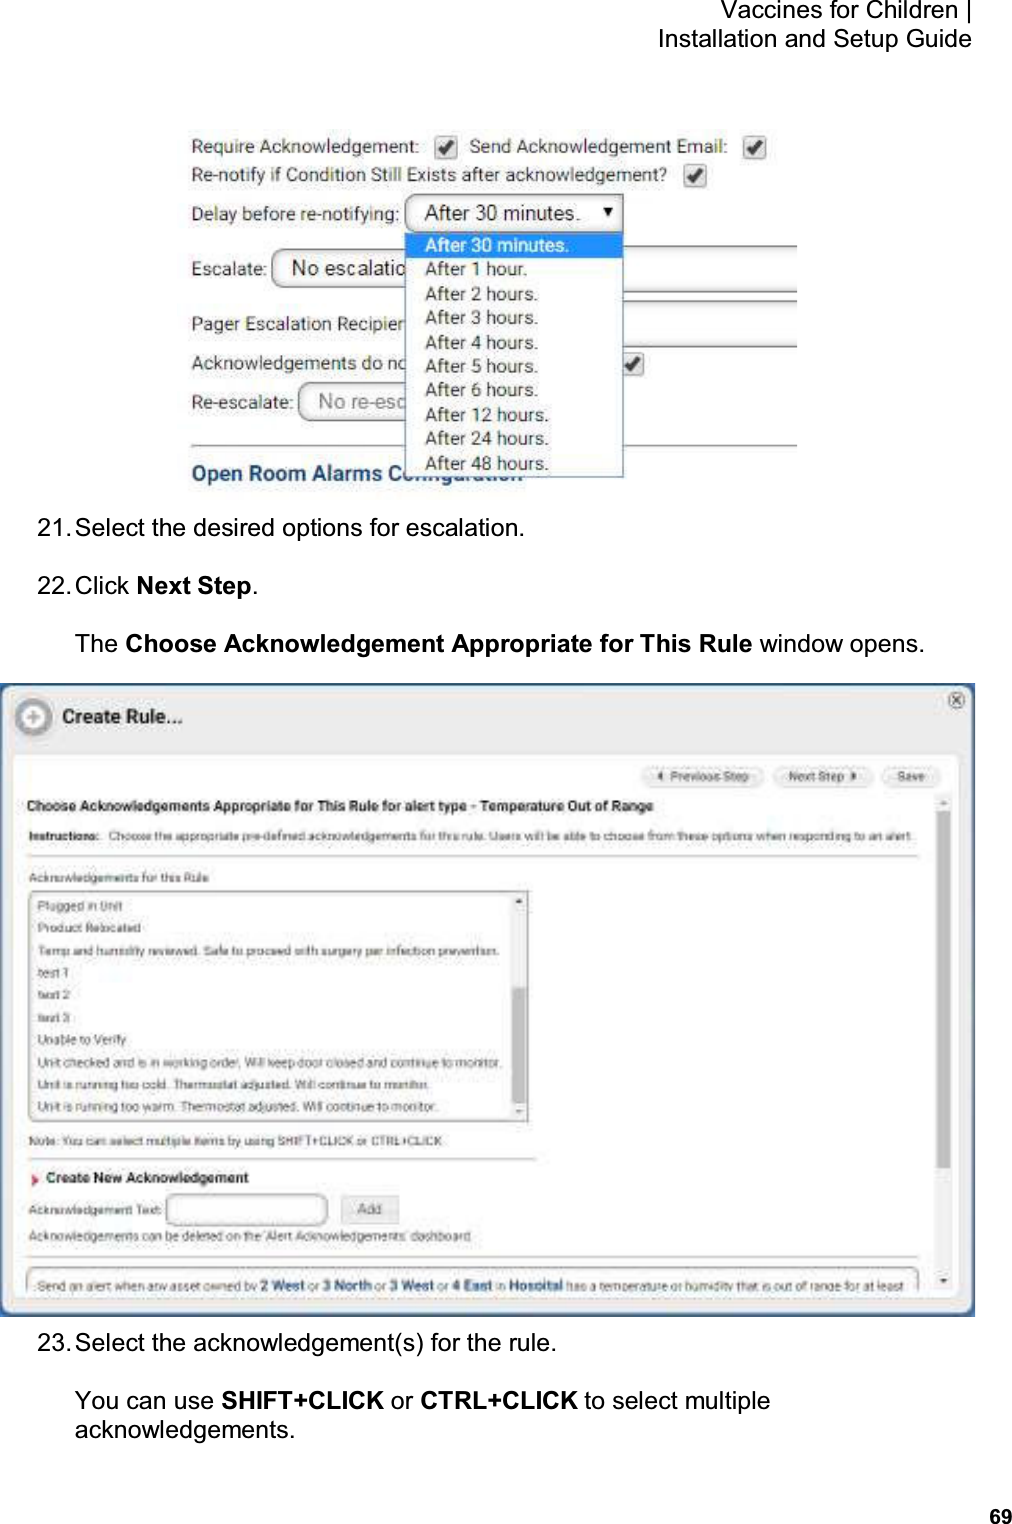           69 Vaccines for Children |  Installation and Setup Guide  21. Select the desired options for escalation. 22. Click Next Step. The Choose Acknowledgement Appropriate for This Rule window opens.  23. Select the acknowledgement(s) for the rule. You can use SHIFT+CLICK or CTRL+CLICK to select multiple acknowledgements. 